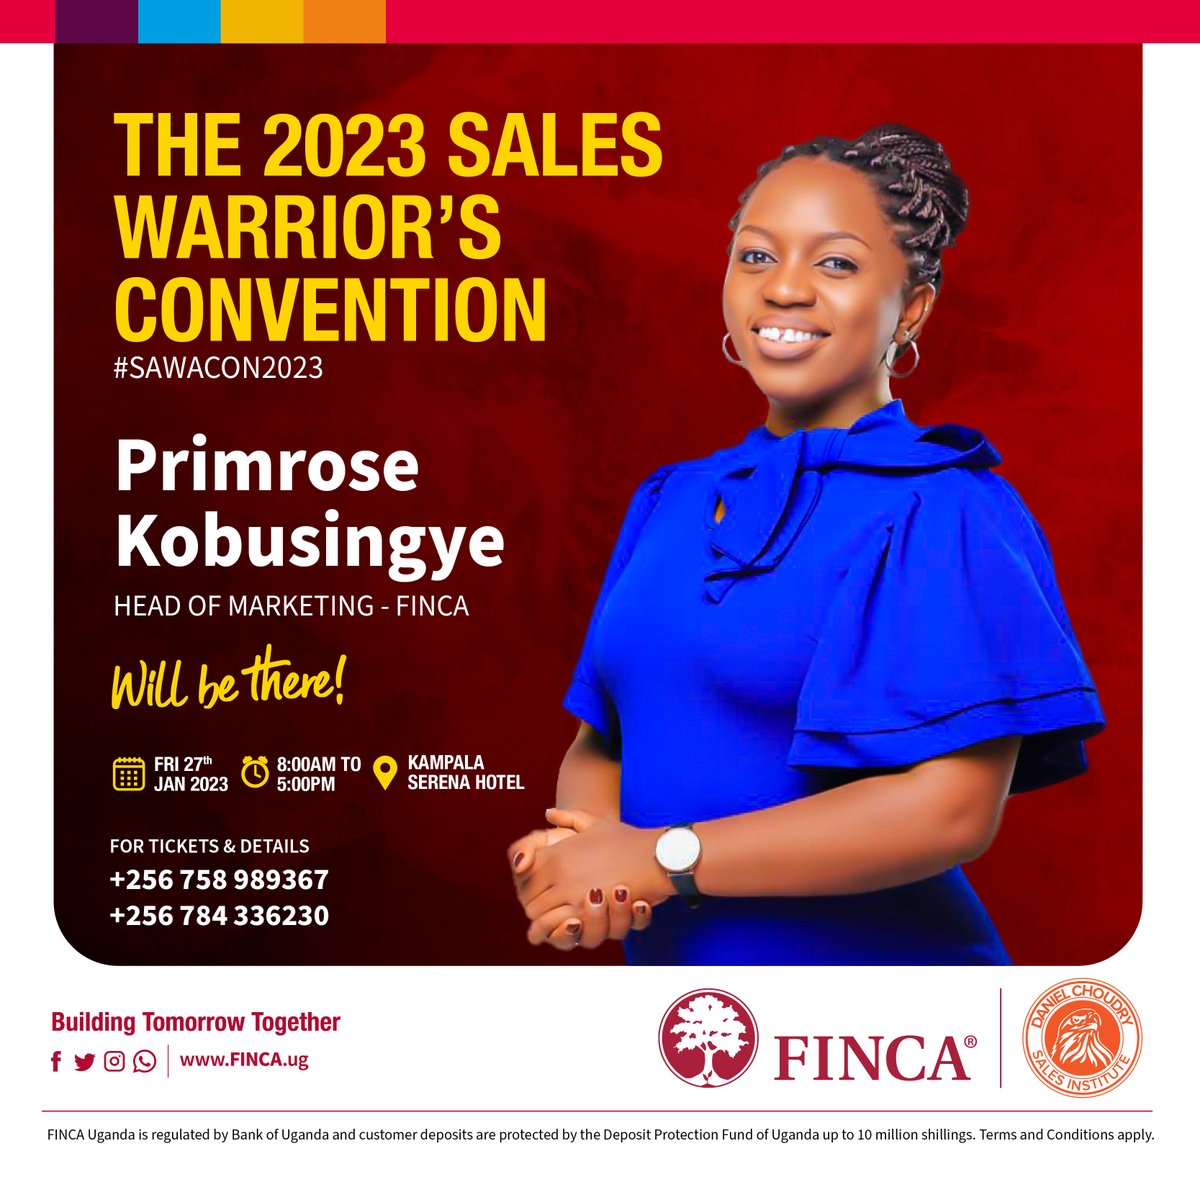 Calling all sales warriors! Don't miss out on the opportunity to sharpen your skills and network with industry leaders at #SAWACON2023. Register now! #salesconvention #salesmotivation #BuildingTomorrowTogether